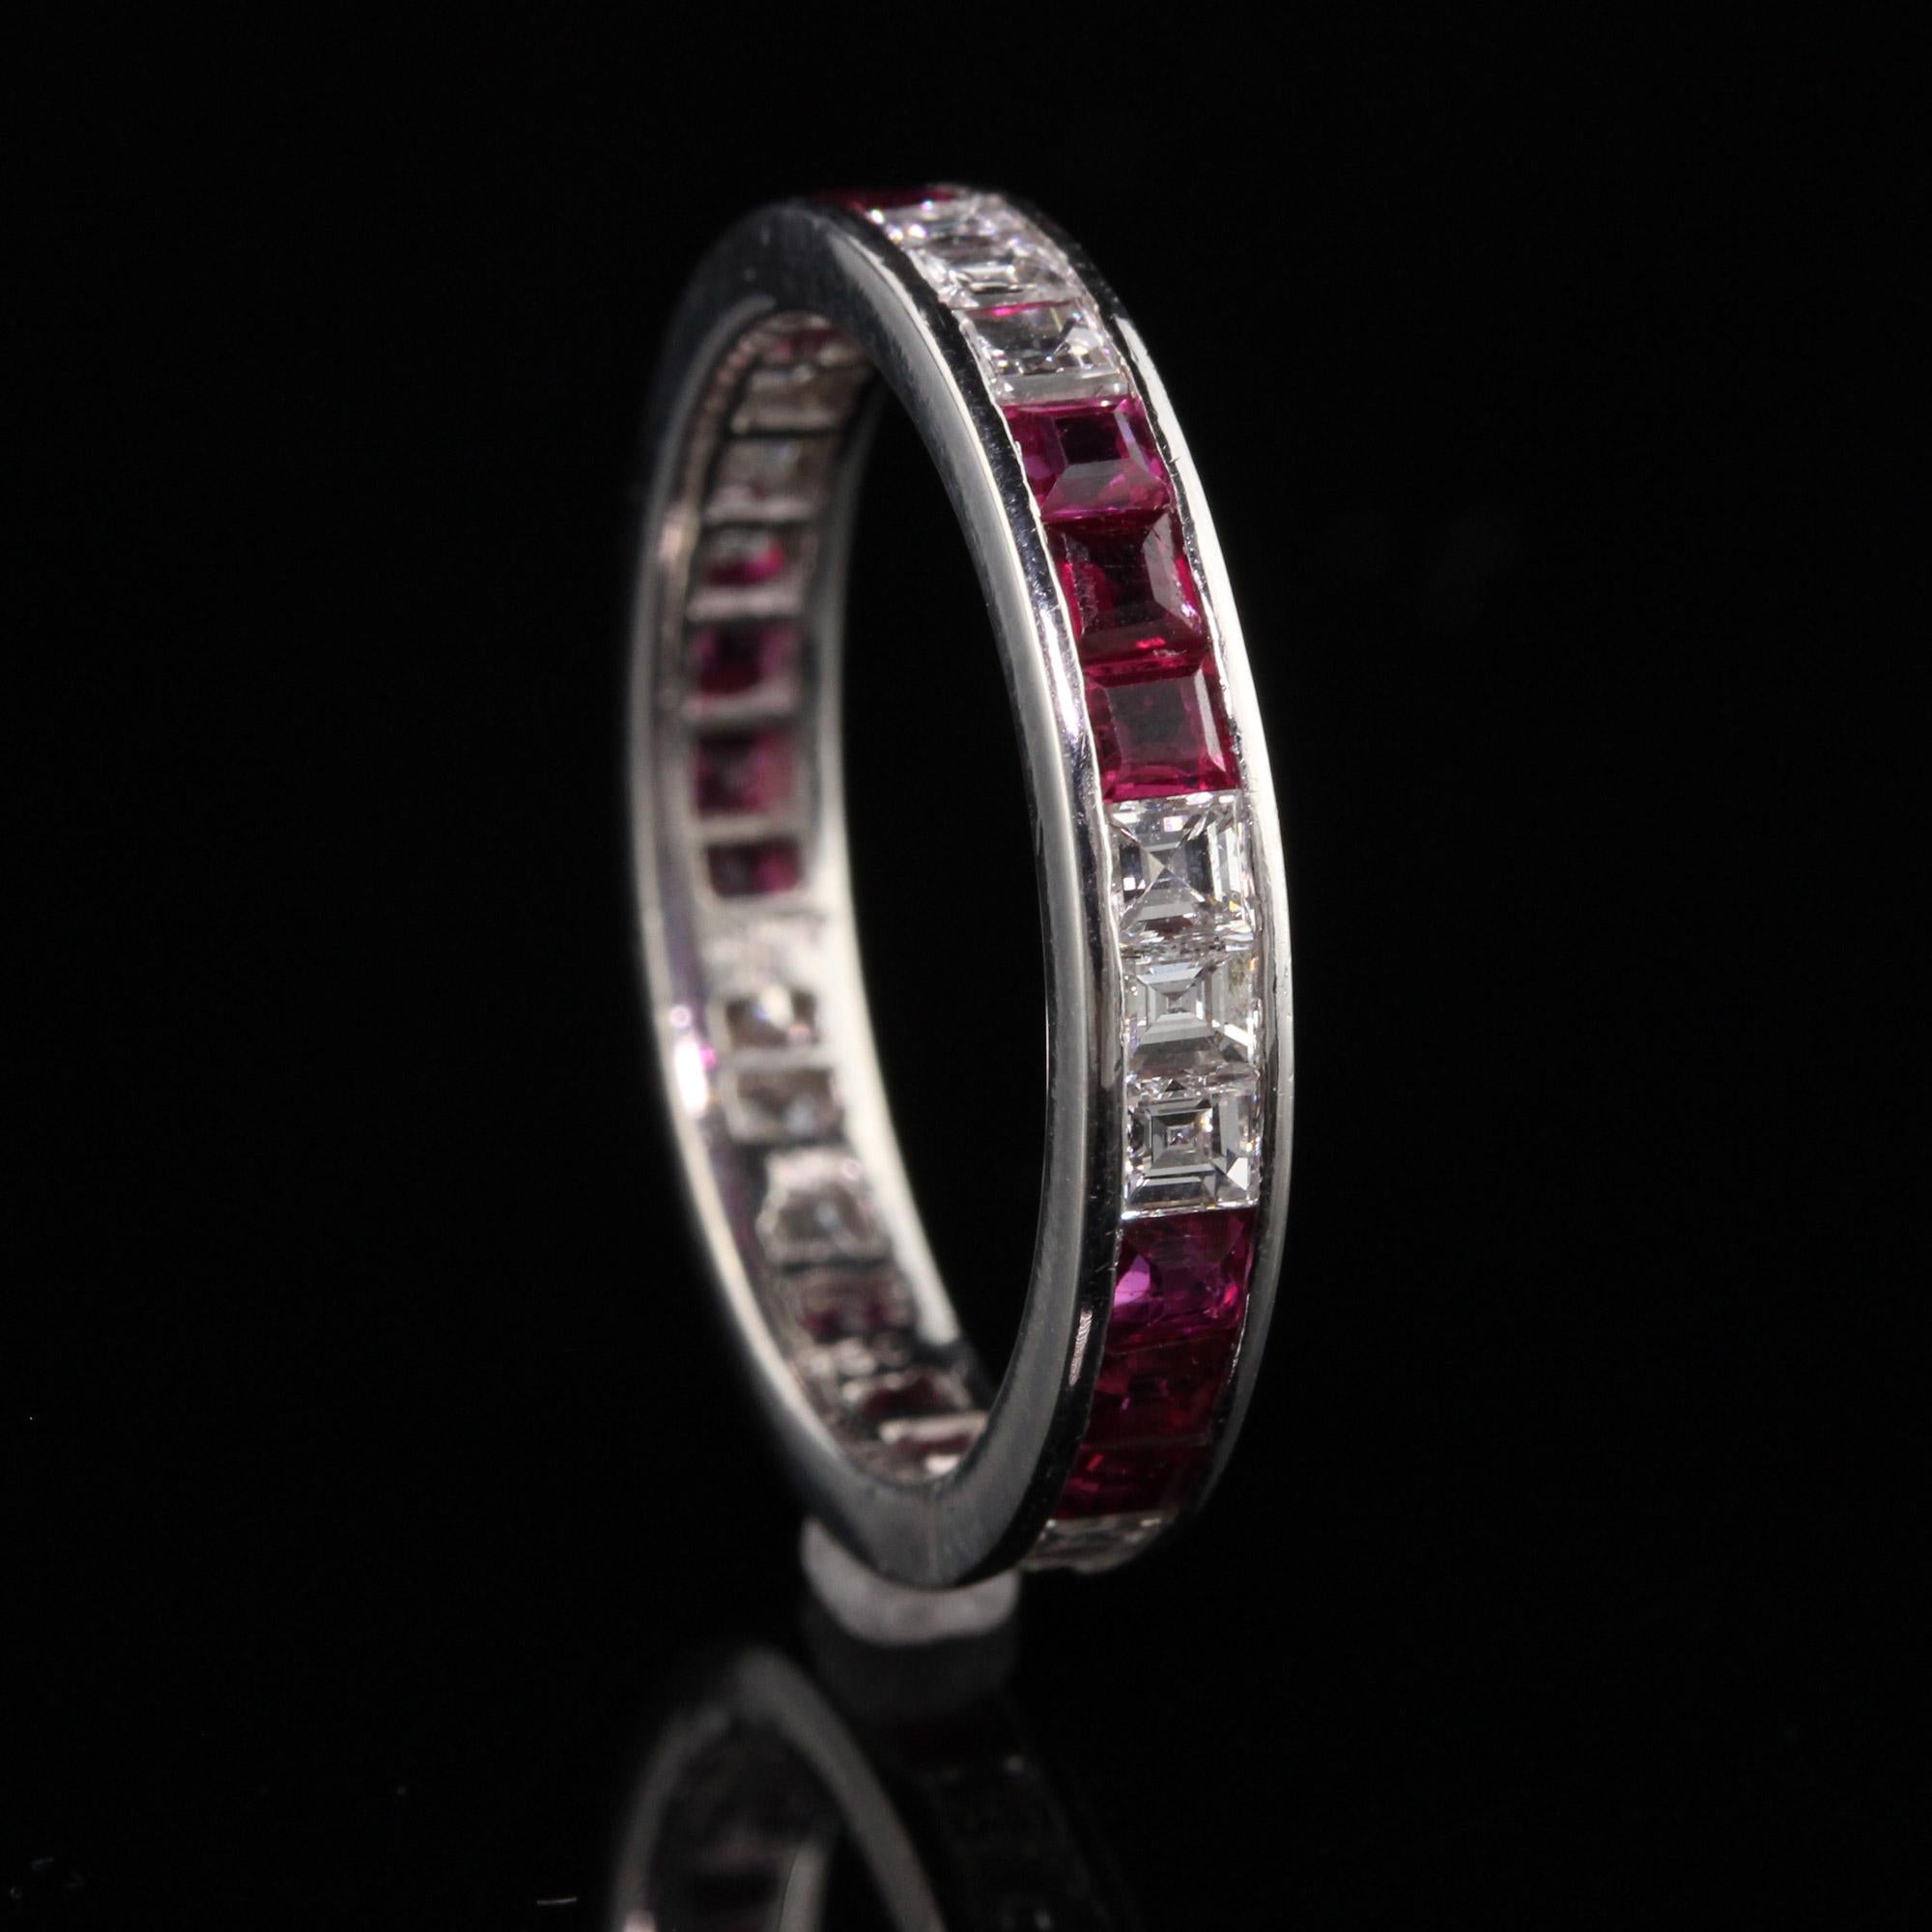 Women's Antique Art Deco 18K White Gold Carre Cut Diamond and Ruby Wedding Band For Sale